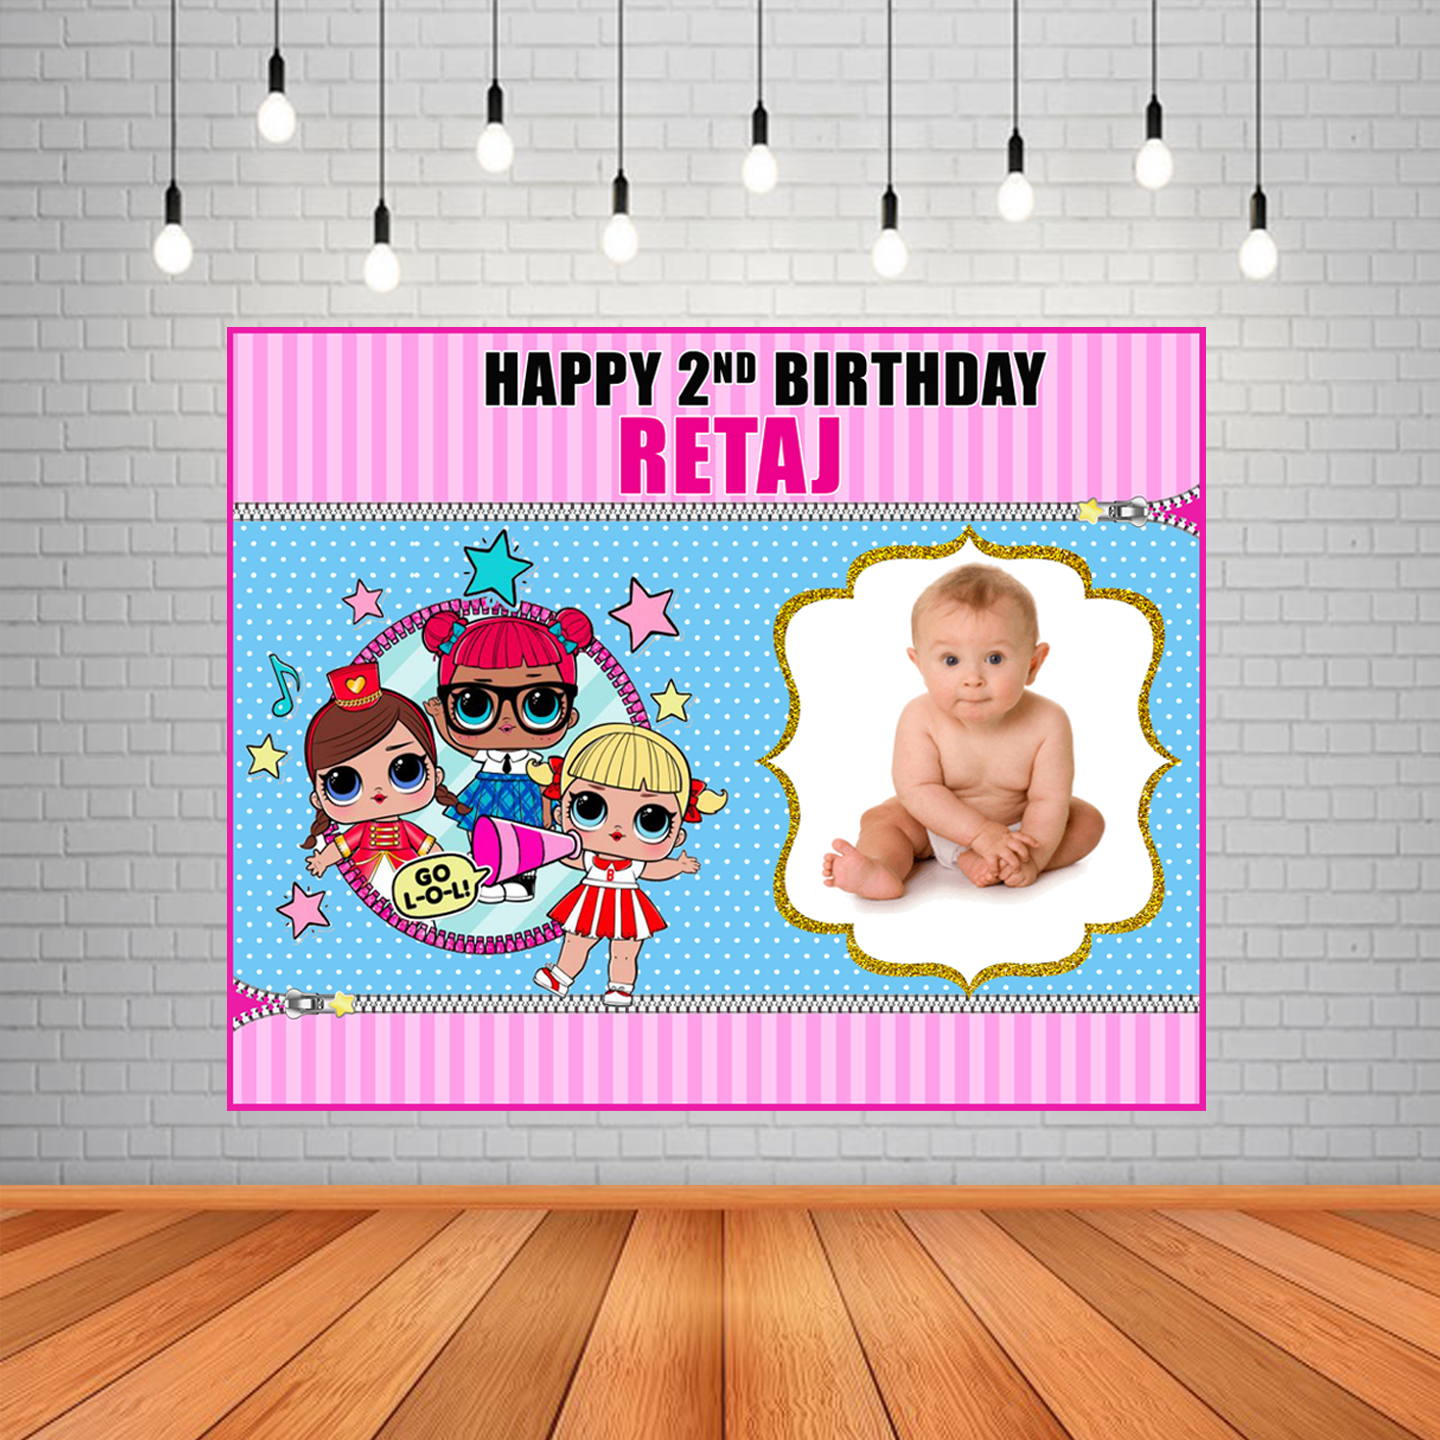 LOL Theme Backdrop / Background Banner With Baby Picture (4ft x 5ft)